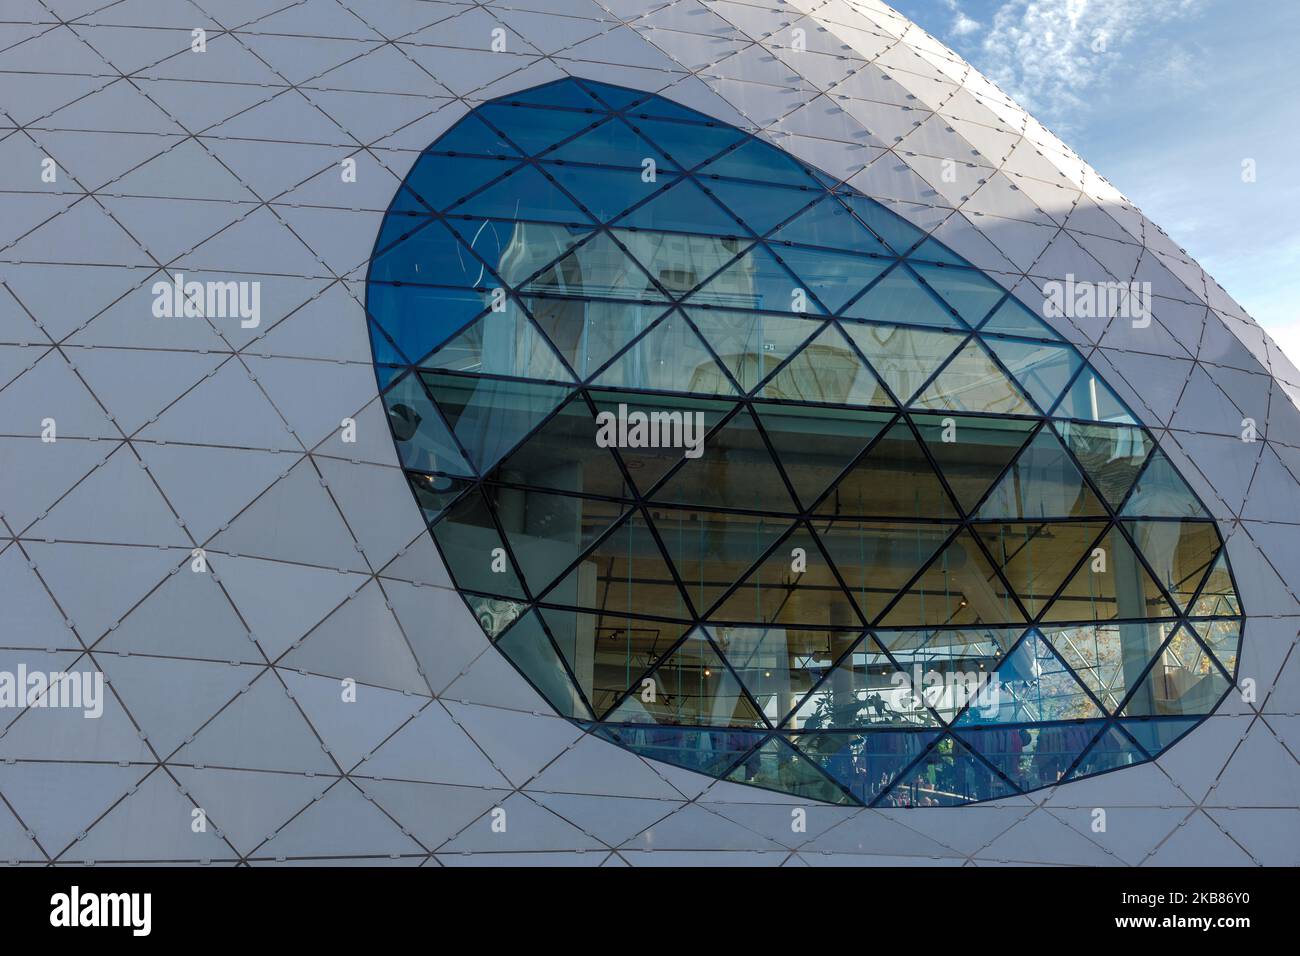 Exterior sunny view of Blob iconic architecture with triangular geometric pattern facade. Stock Photo